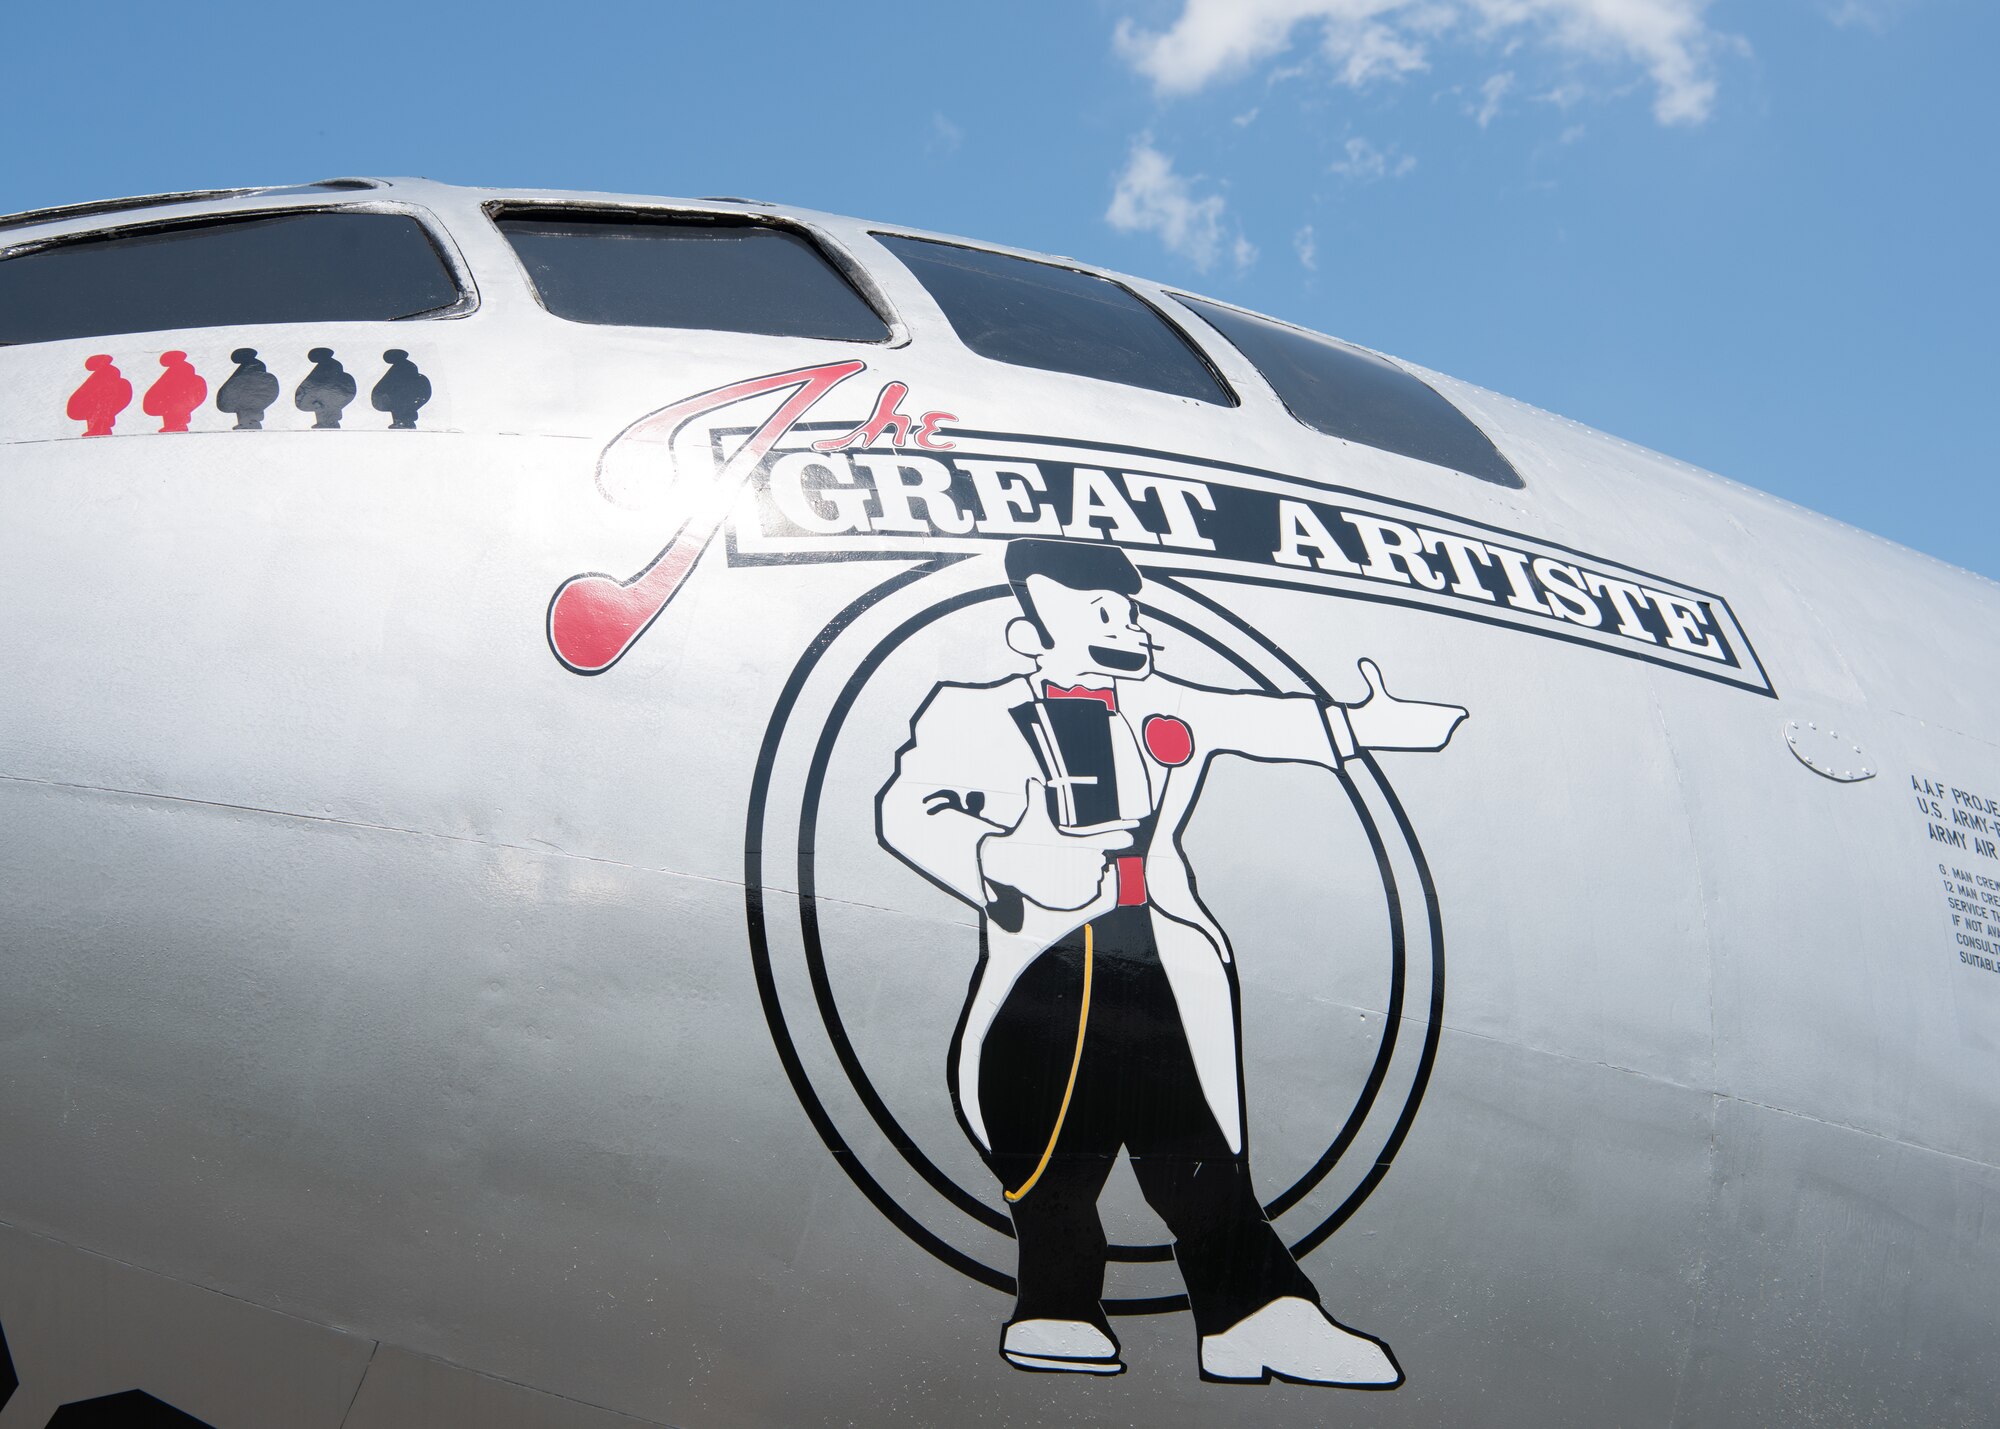 A B-29 Superfortress painted to commemorate “The Great Artiste”, a silverplate B-29 with the 509th Composite Group, sits as a static display on August 6, 2019, at the Spirit Gate at Whiteman Air Force Base, Missouri.The airframe was previously used as a search and rescue aircraft during the Korean War as an SB-29 which was designed to carry a lifeboat and other survival supplies. (U.S. Air Force photo by Airman 1st Class Parker J. McCauley)